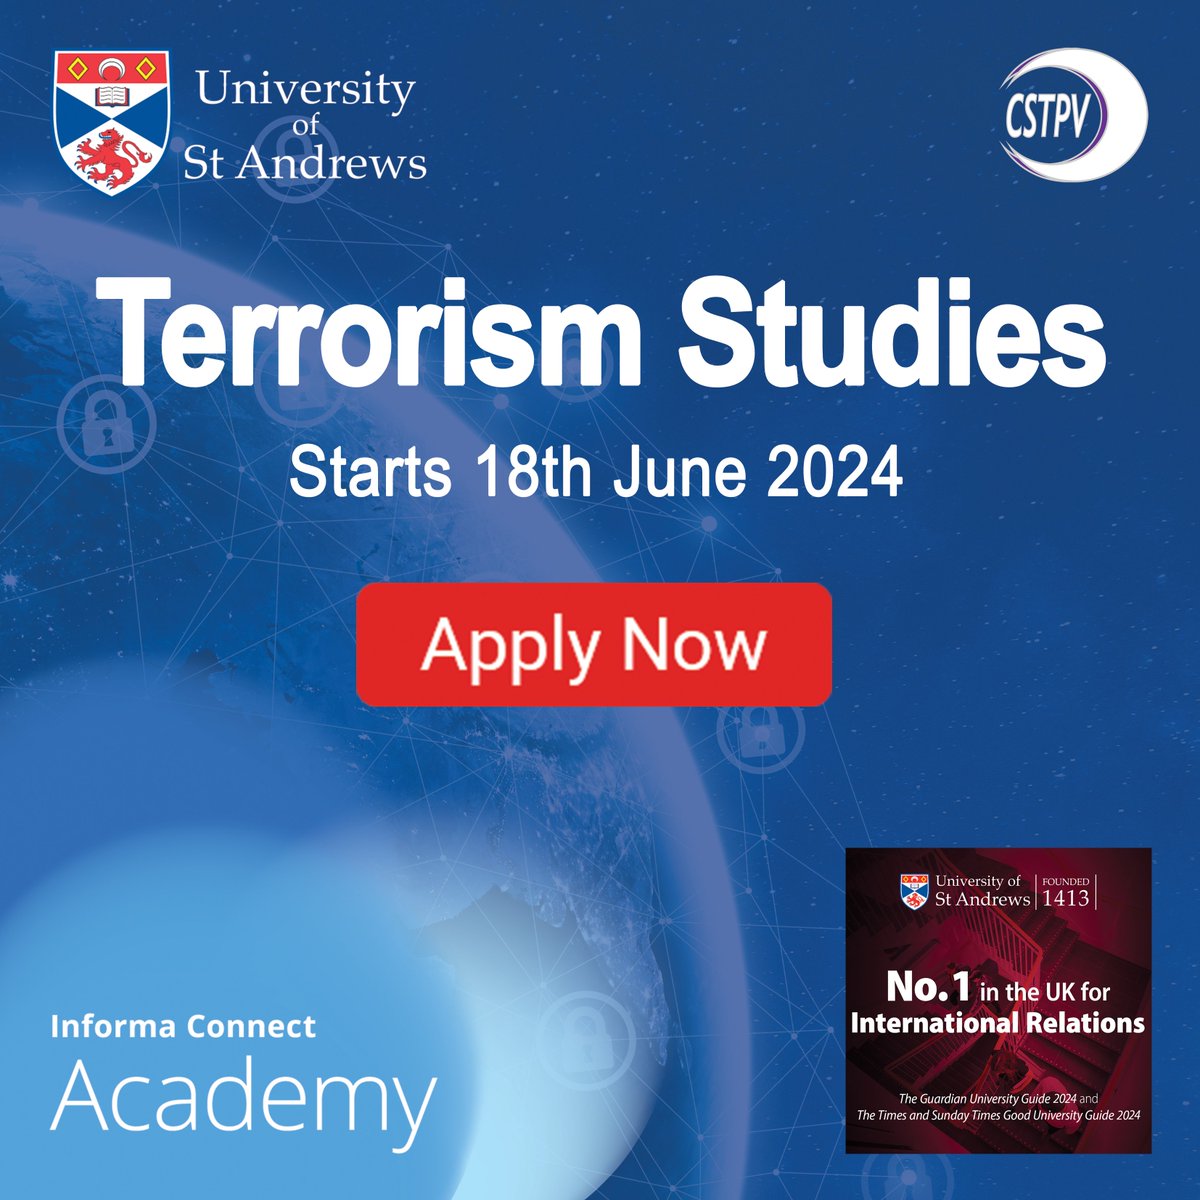 Only 5 days left to save up to £500… Book online now: rb.gy/g44zca Your saving expires this Friday the 12th of April! #counterterrorism #security #onlinelearning #careerprogression